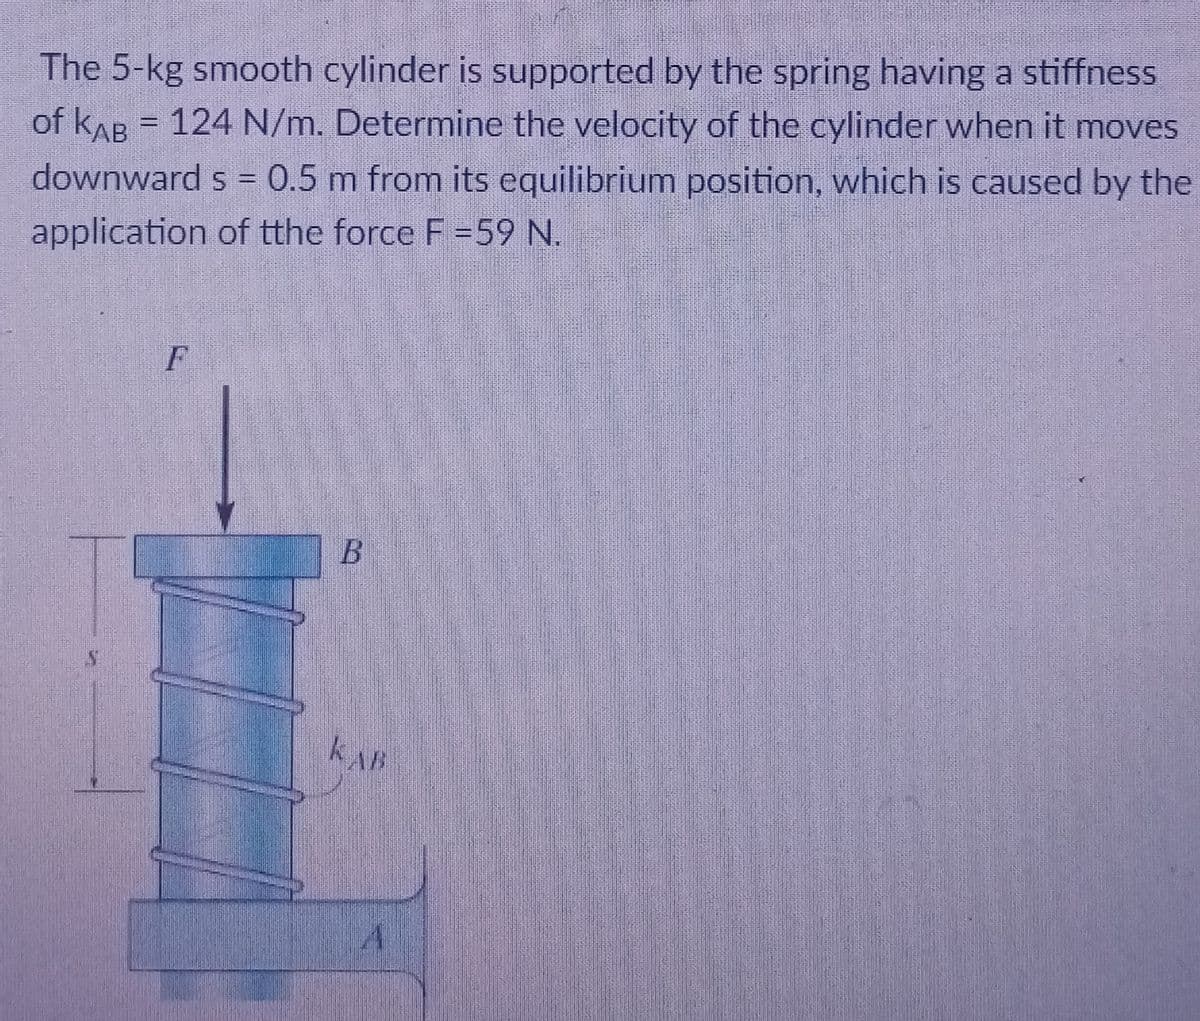 The 5-kg smooth cylinder is supported by the spring having a stiffness
of kAB = 124 N/m. Determine the velocity of the cylinder when it moves
downward s = 0.5 m from its equilibrium position, which is caused by the
application of tthe force F =59N.
F
KAB
